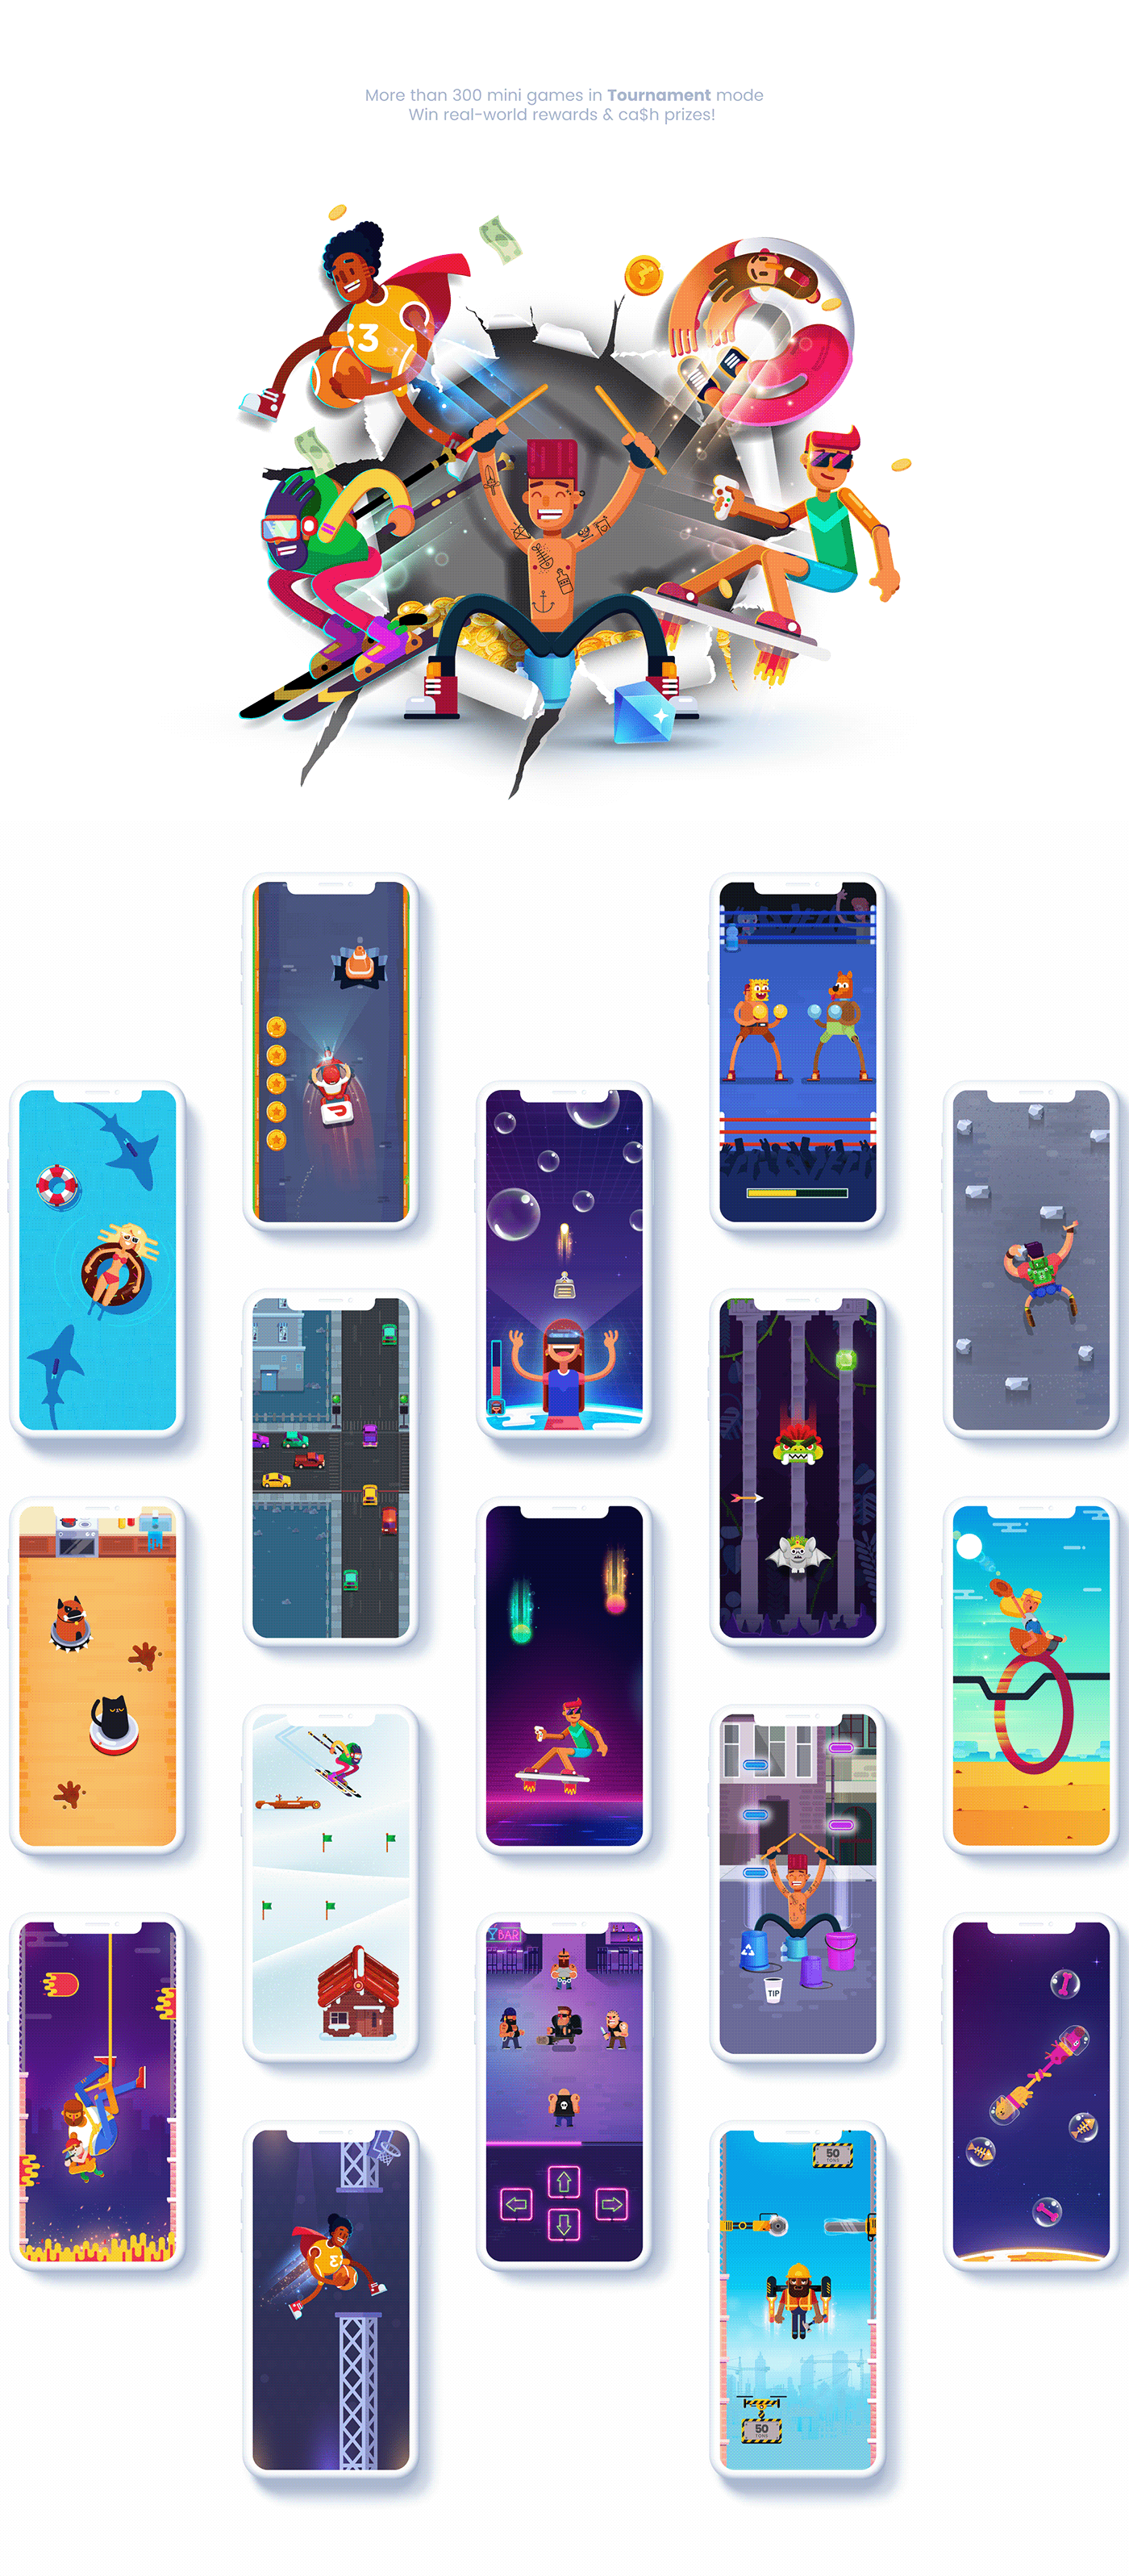 android games apps branding  characters flat design flat illustration ios games mobile games ready games Video Games